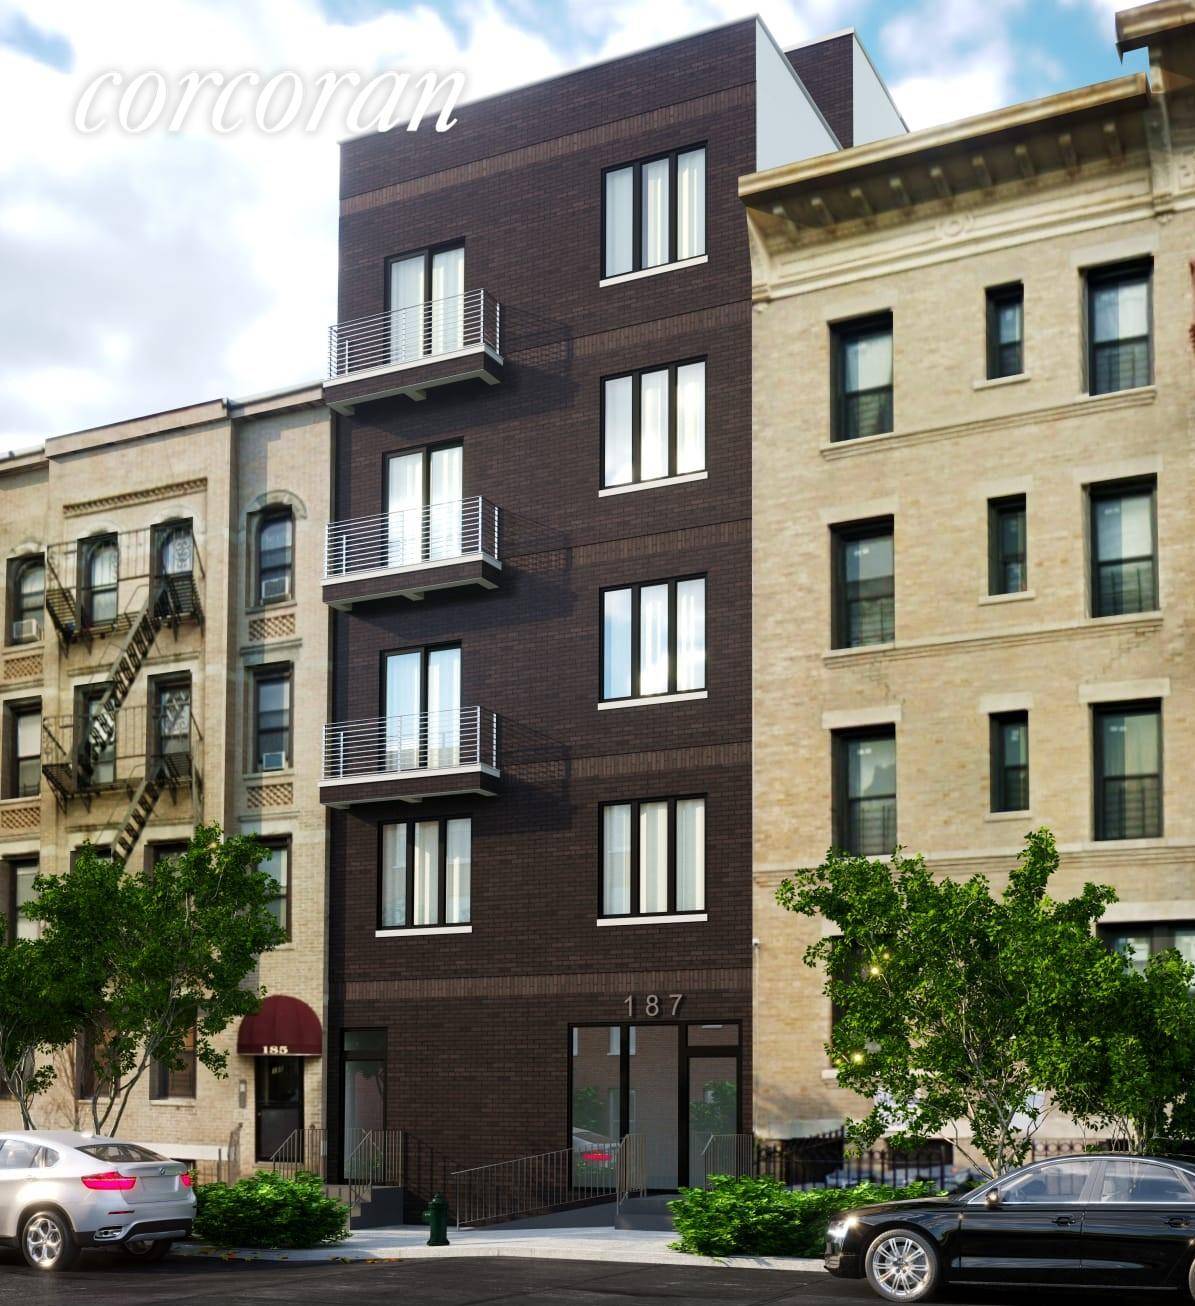 Welcome to 187 20th street ; Brand New Boutique Residential Development on the border of South Slope and Greenwood.